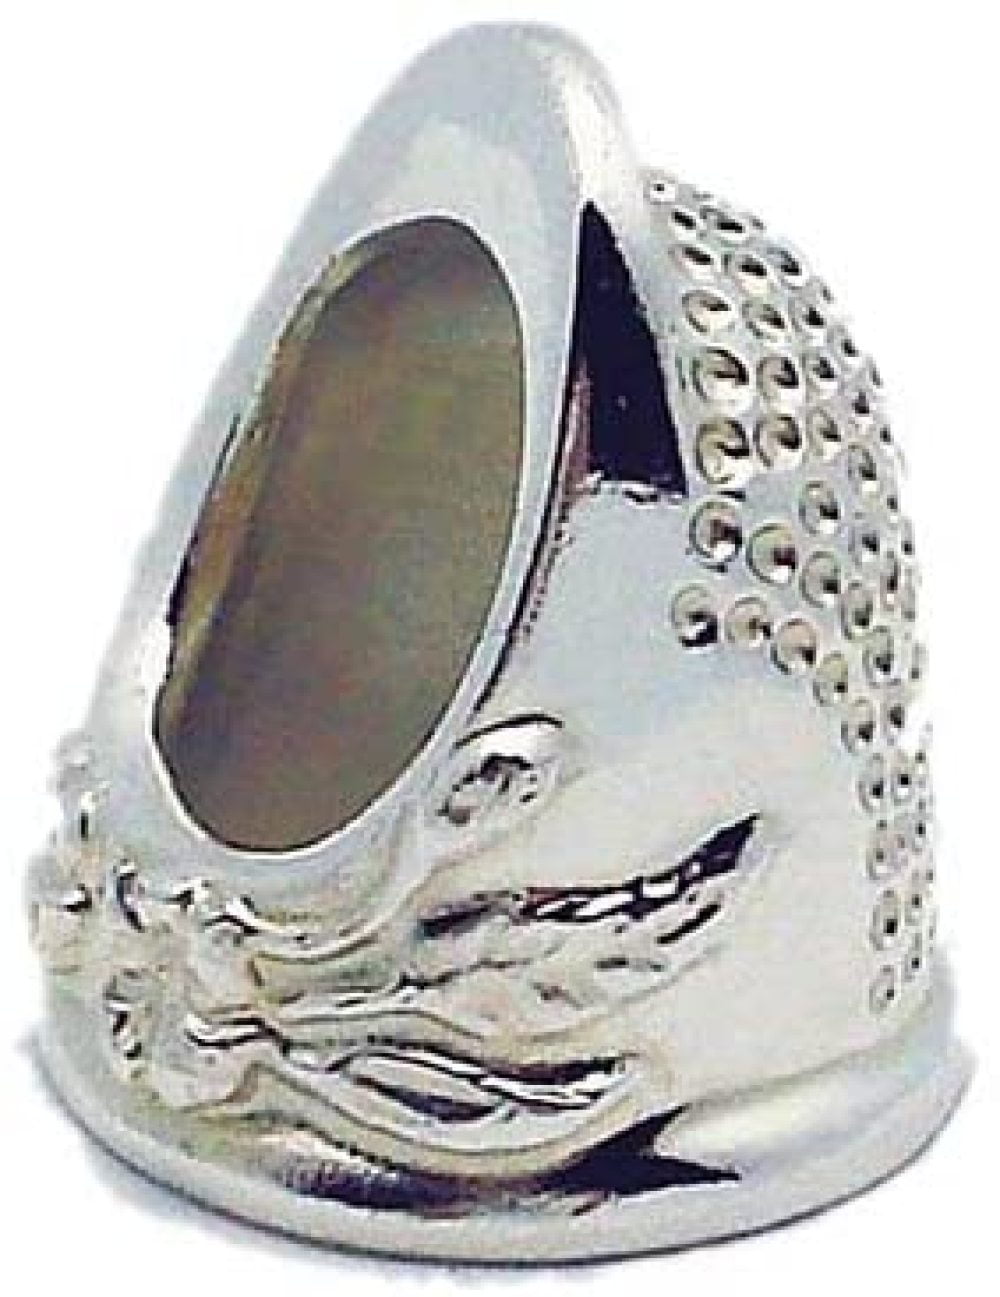 Roxanne Solid Sterling Silver Size 4.5 Thimble by Colonial Needle Co 